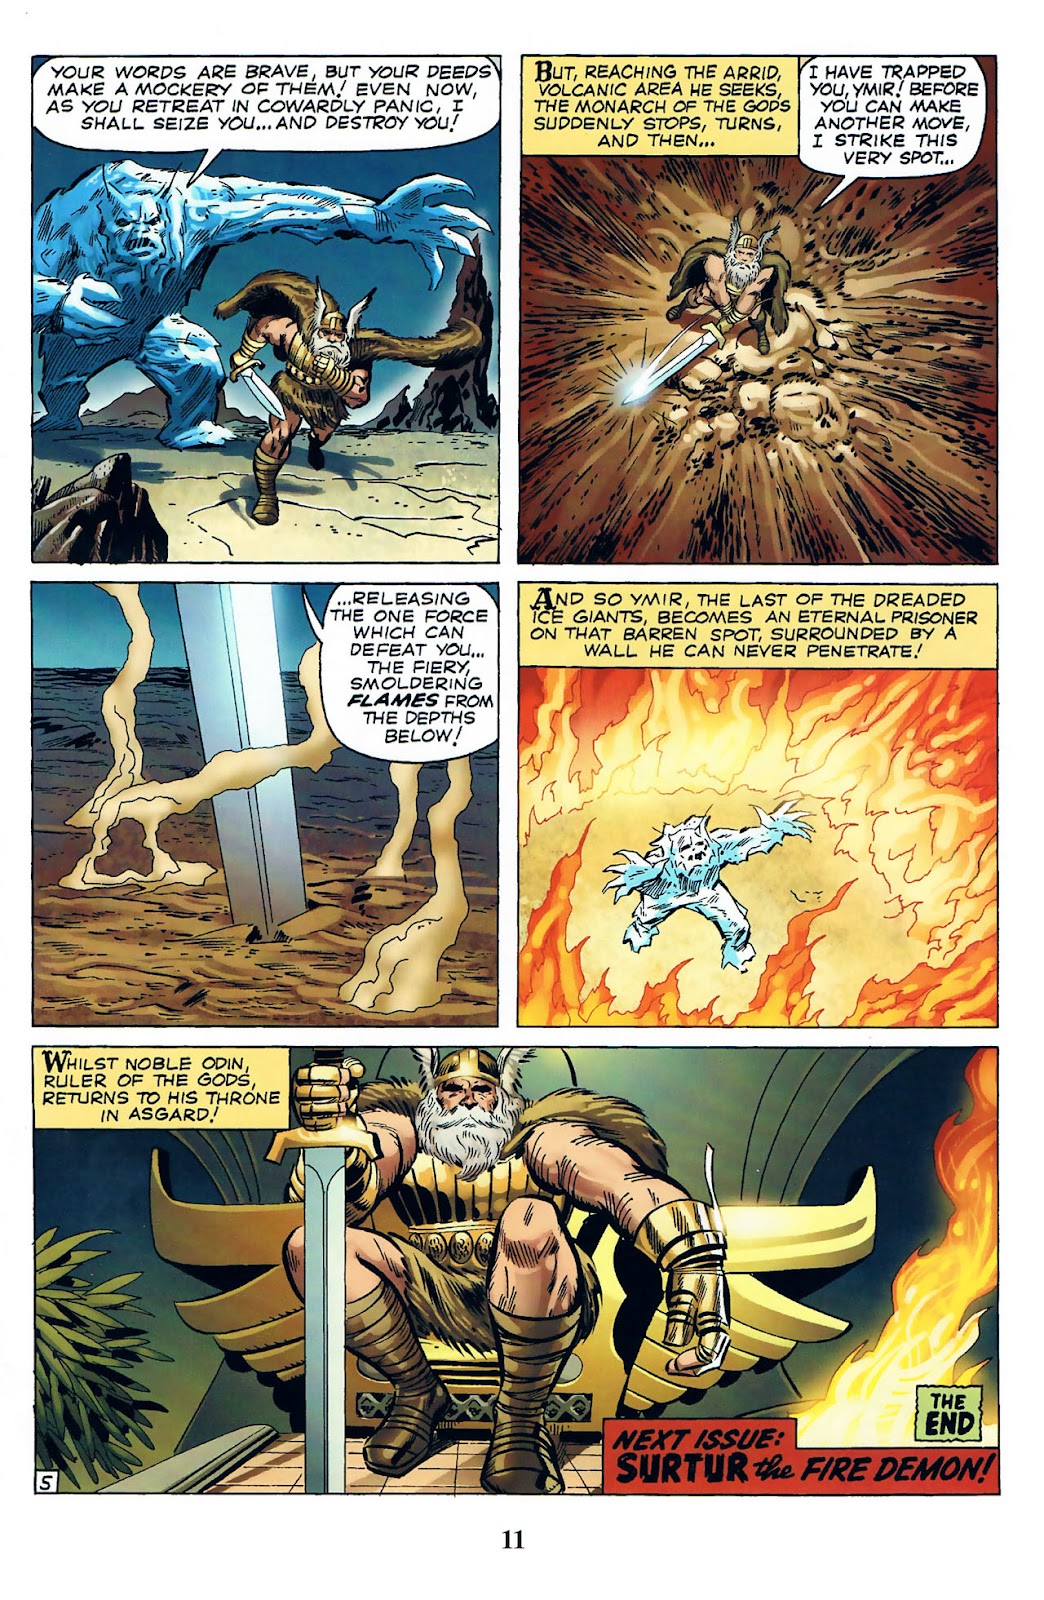 Thor: Tales of Asgard by Stan Lee & Jack Kirby issue 1 - Page 13